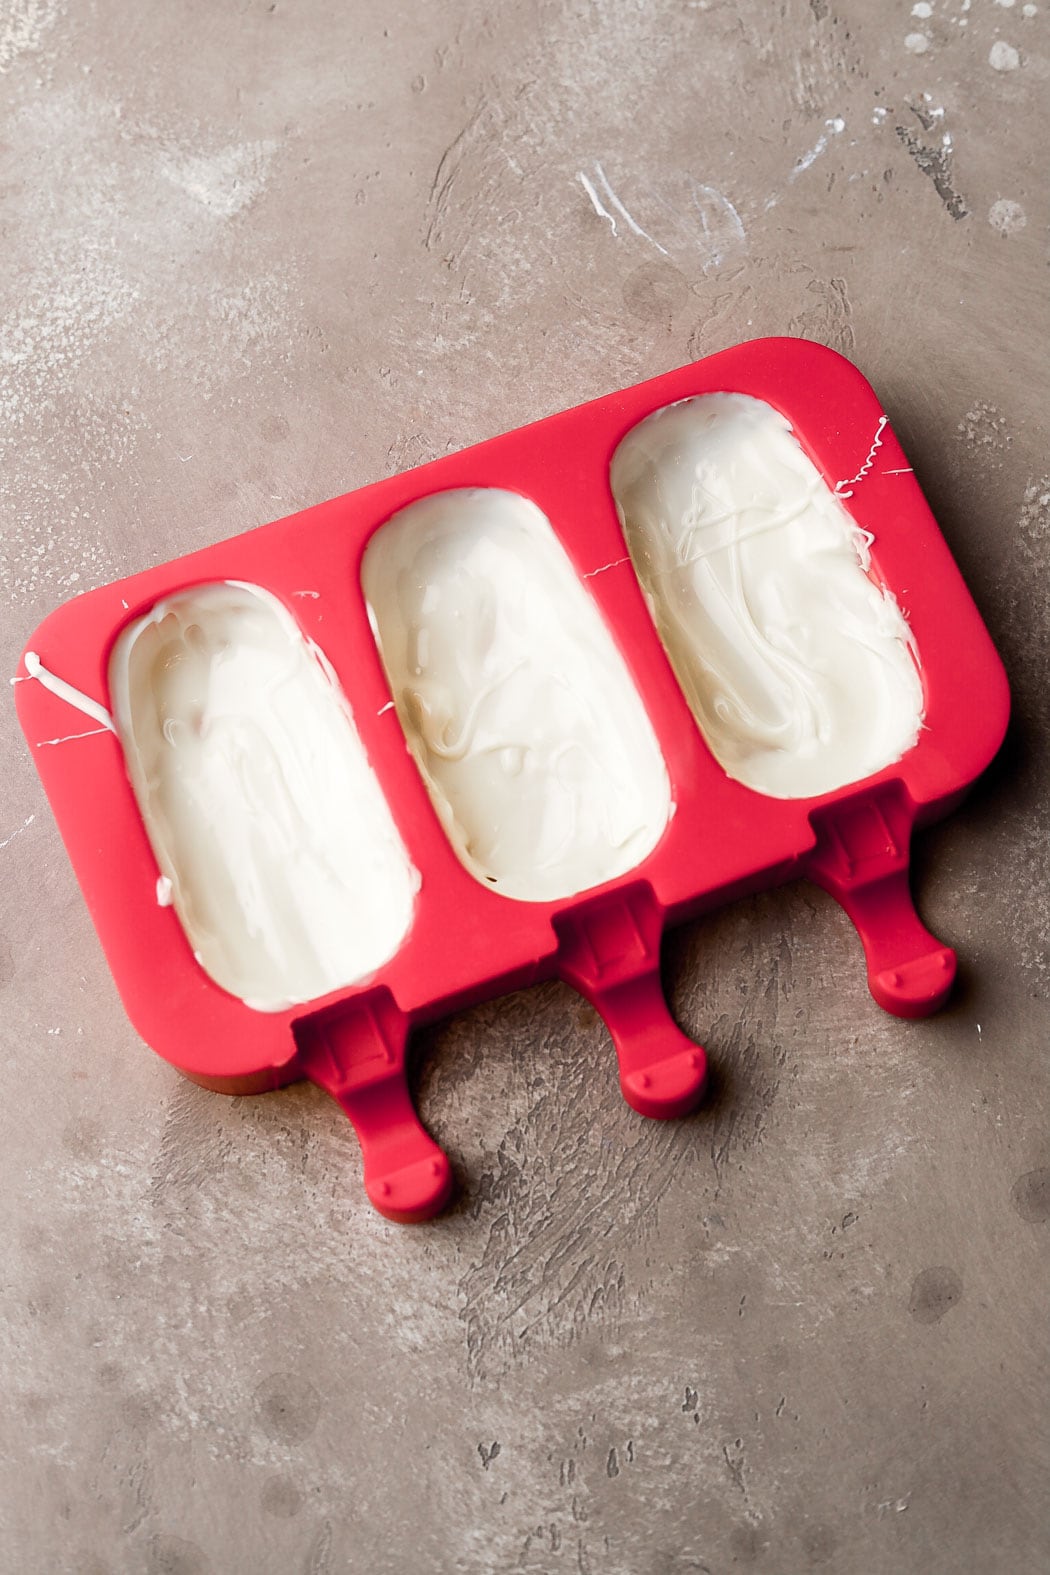 spread white chocolate into molds and let it set